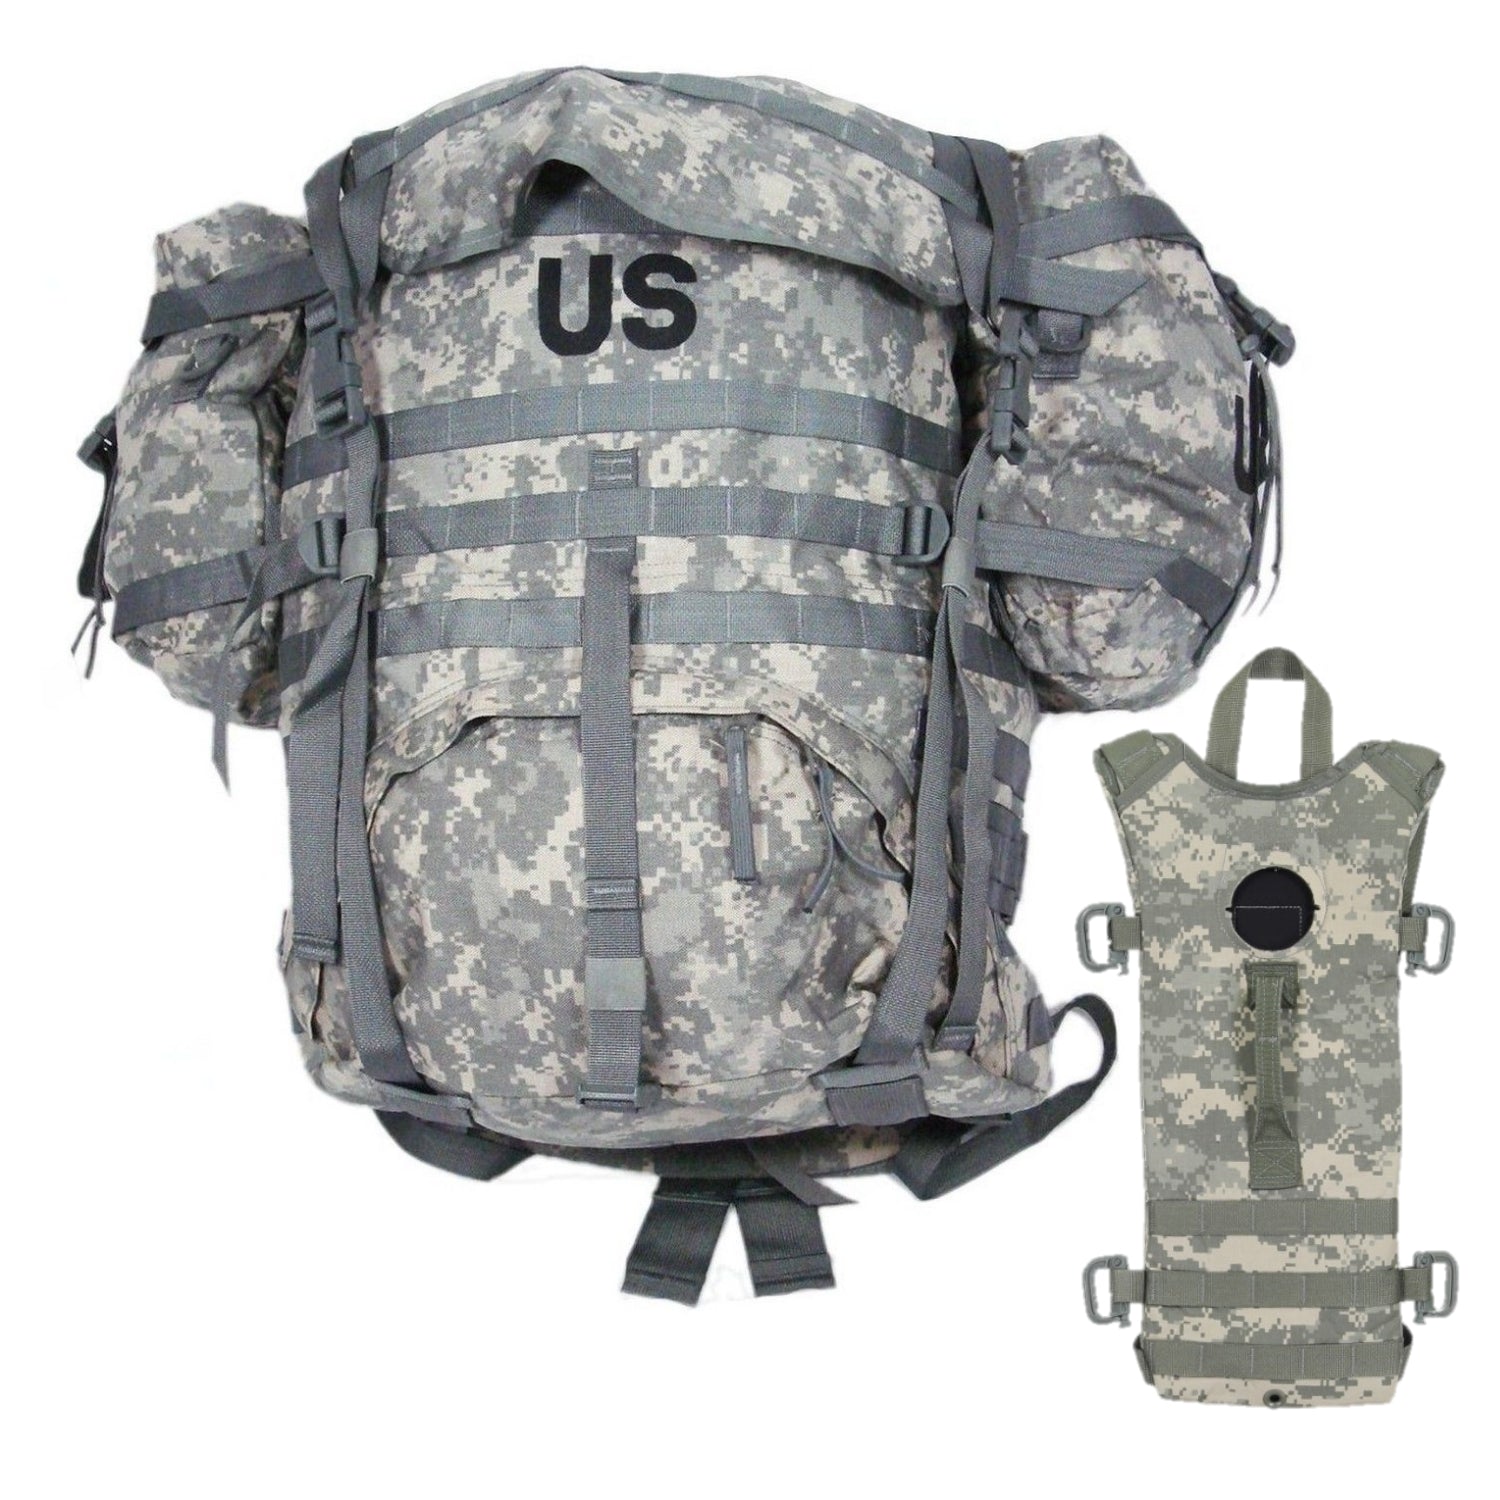 Kidney ACU McGuire Army Pouches Military Navy Frame, Pads and 2 II GI Large Molle US – with RuckSack